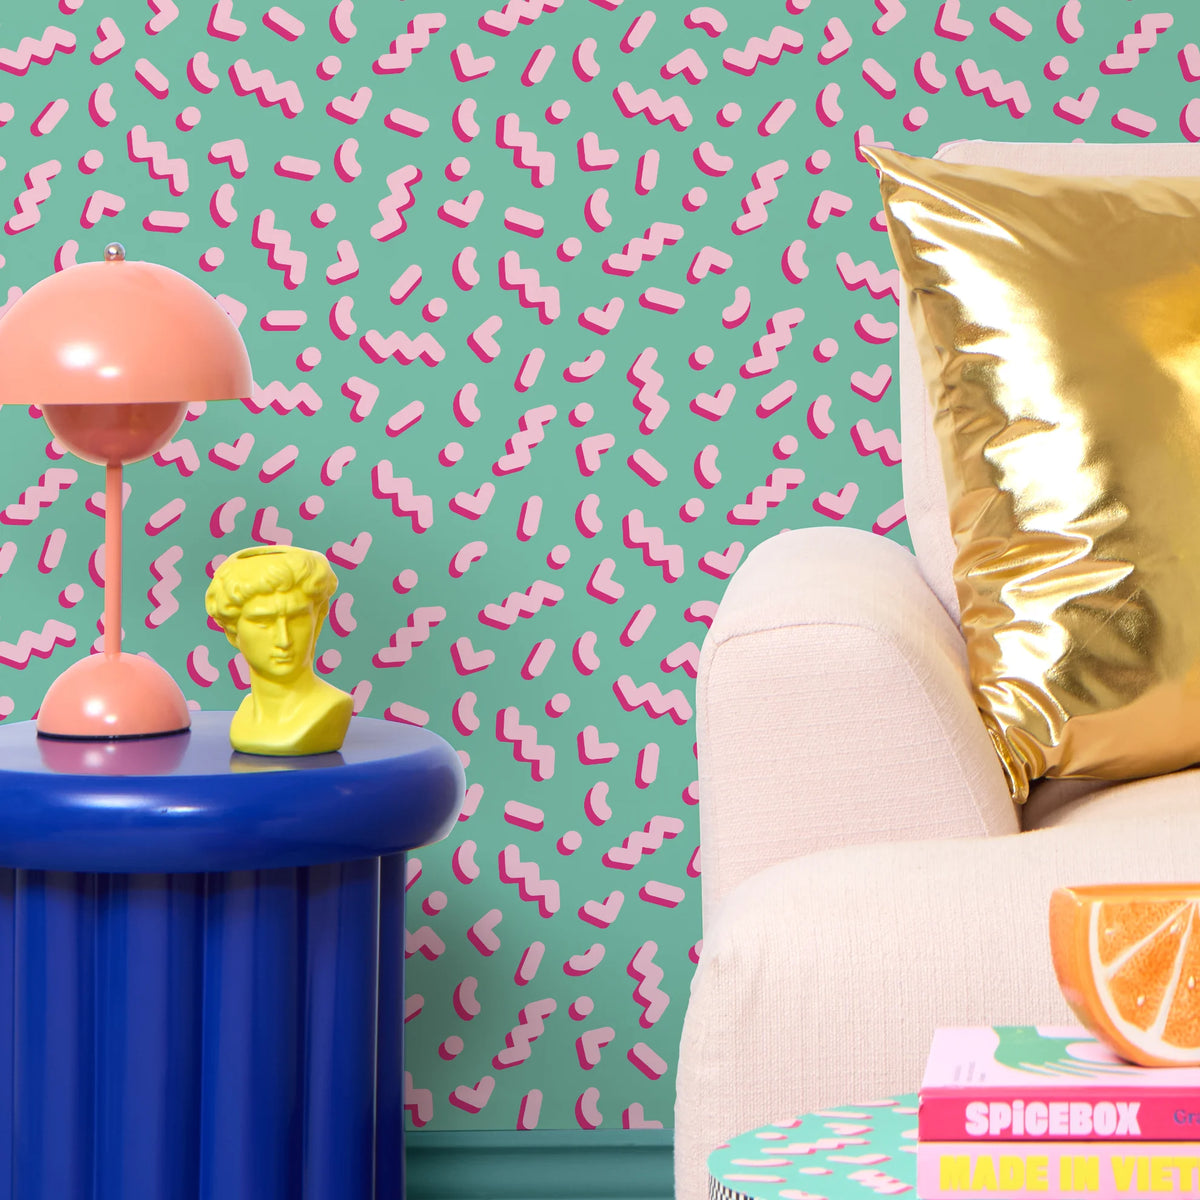 Move To The Music Wallpaper In Miami Mint And Bubblegum Pink – Lust Home